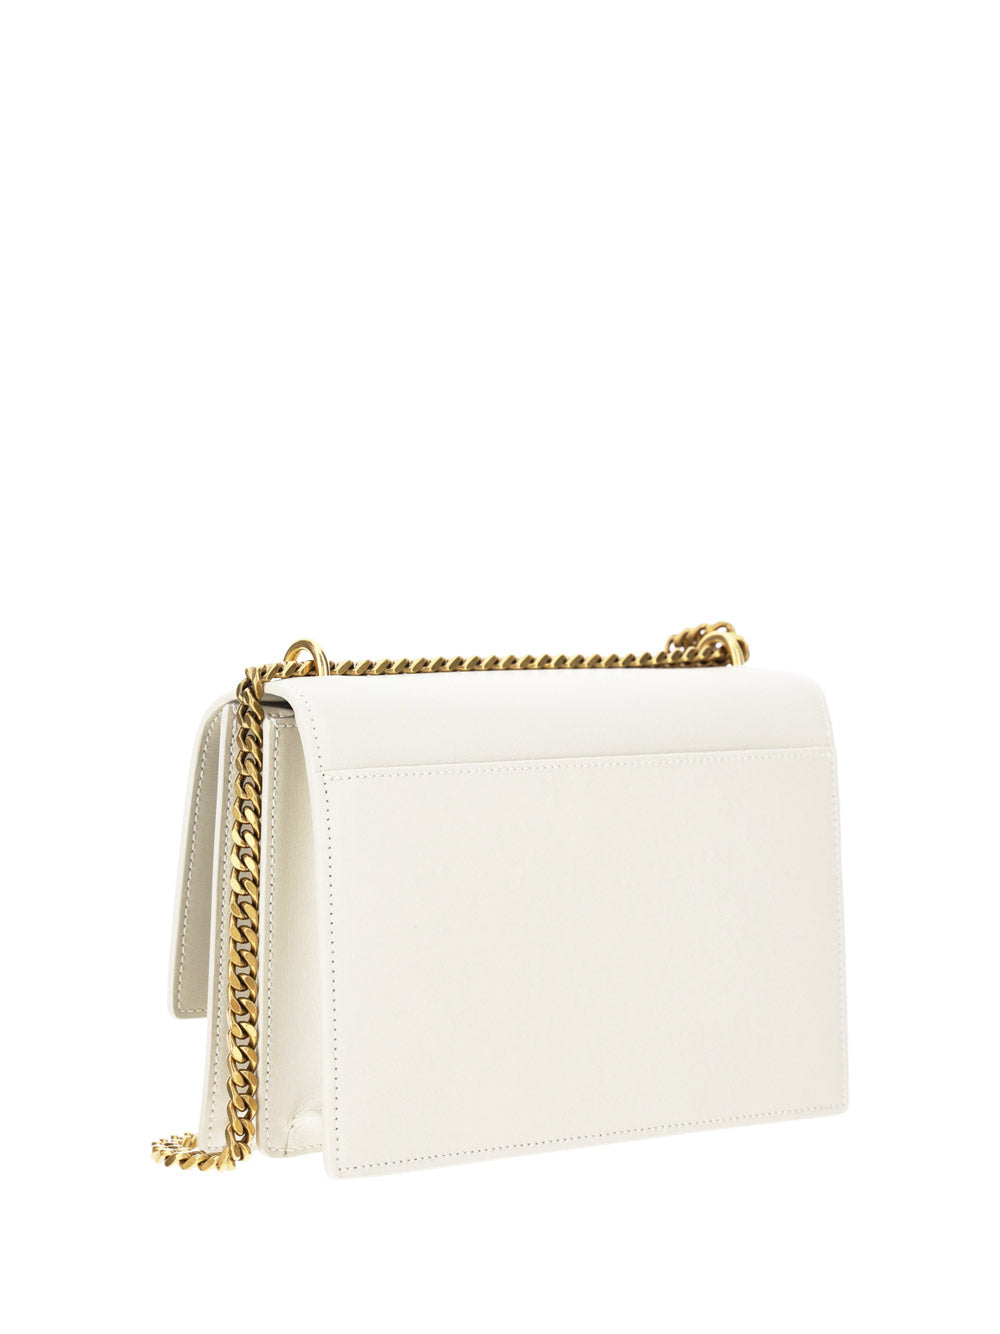 Sunset Medium Chain Bag in Smooth Leather - Blanc Vintage